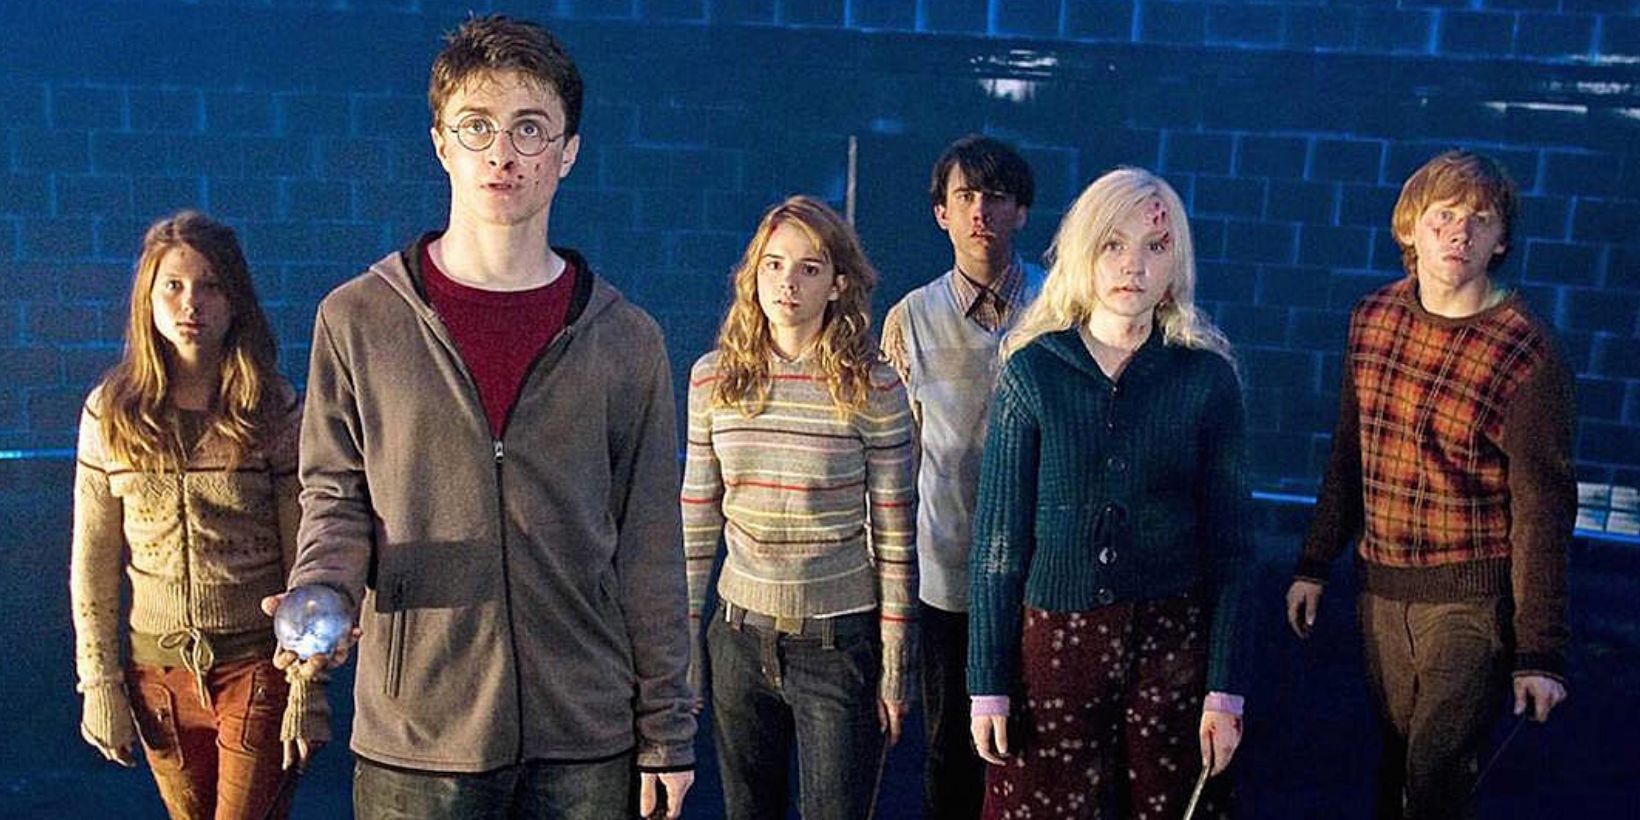 Dumbledores Army Members At The Ministry For Magic In Harry Potter